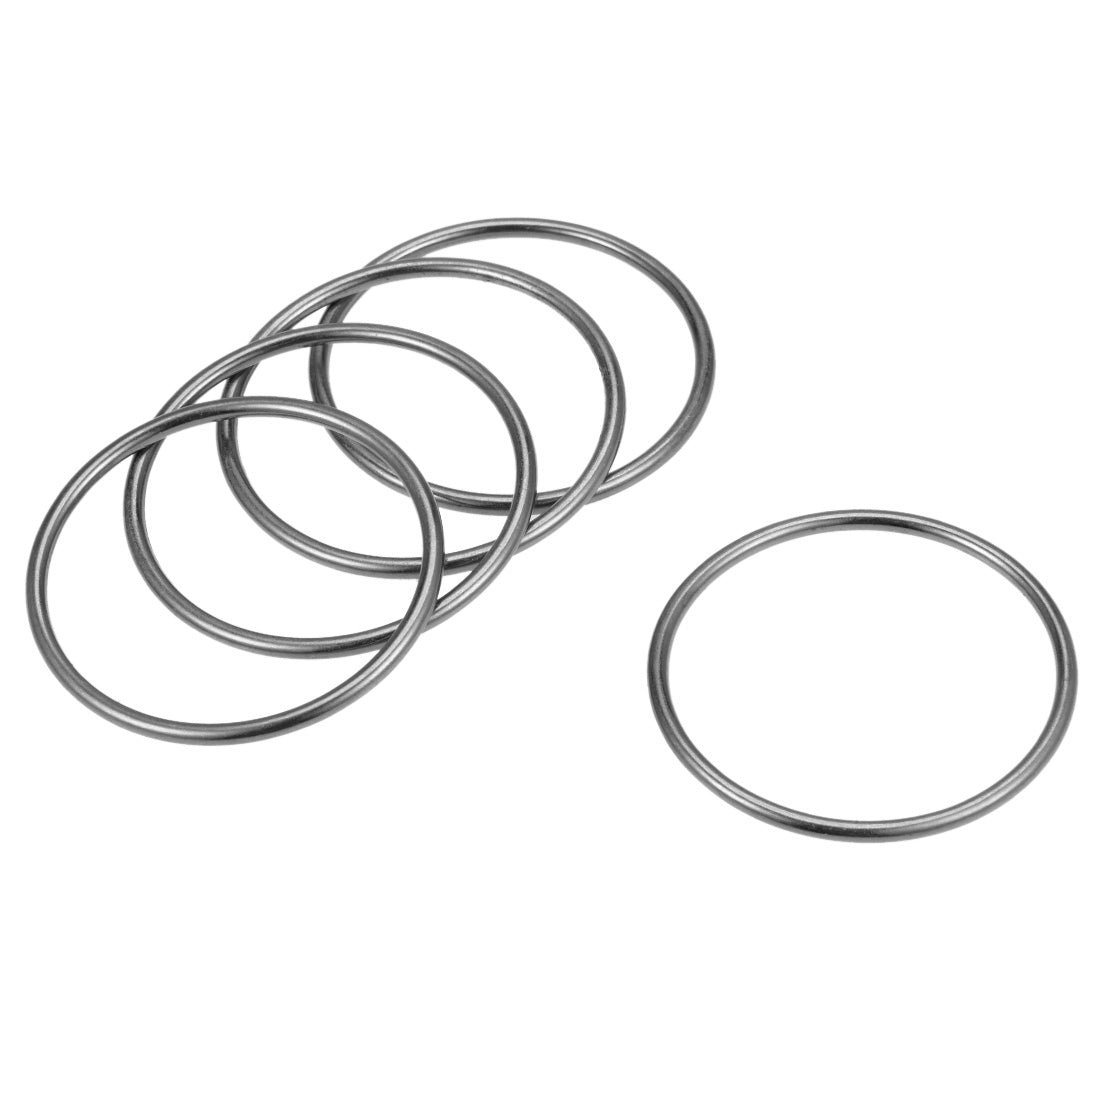 uxcell Uxcell O Ring Buckle 50mm(2") ID 3mm Thickness Zinc Alloy O-Rings for Hardware Bags Belts Craft DIY Accessories, Black 5pcs